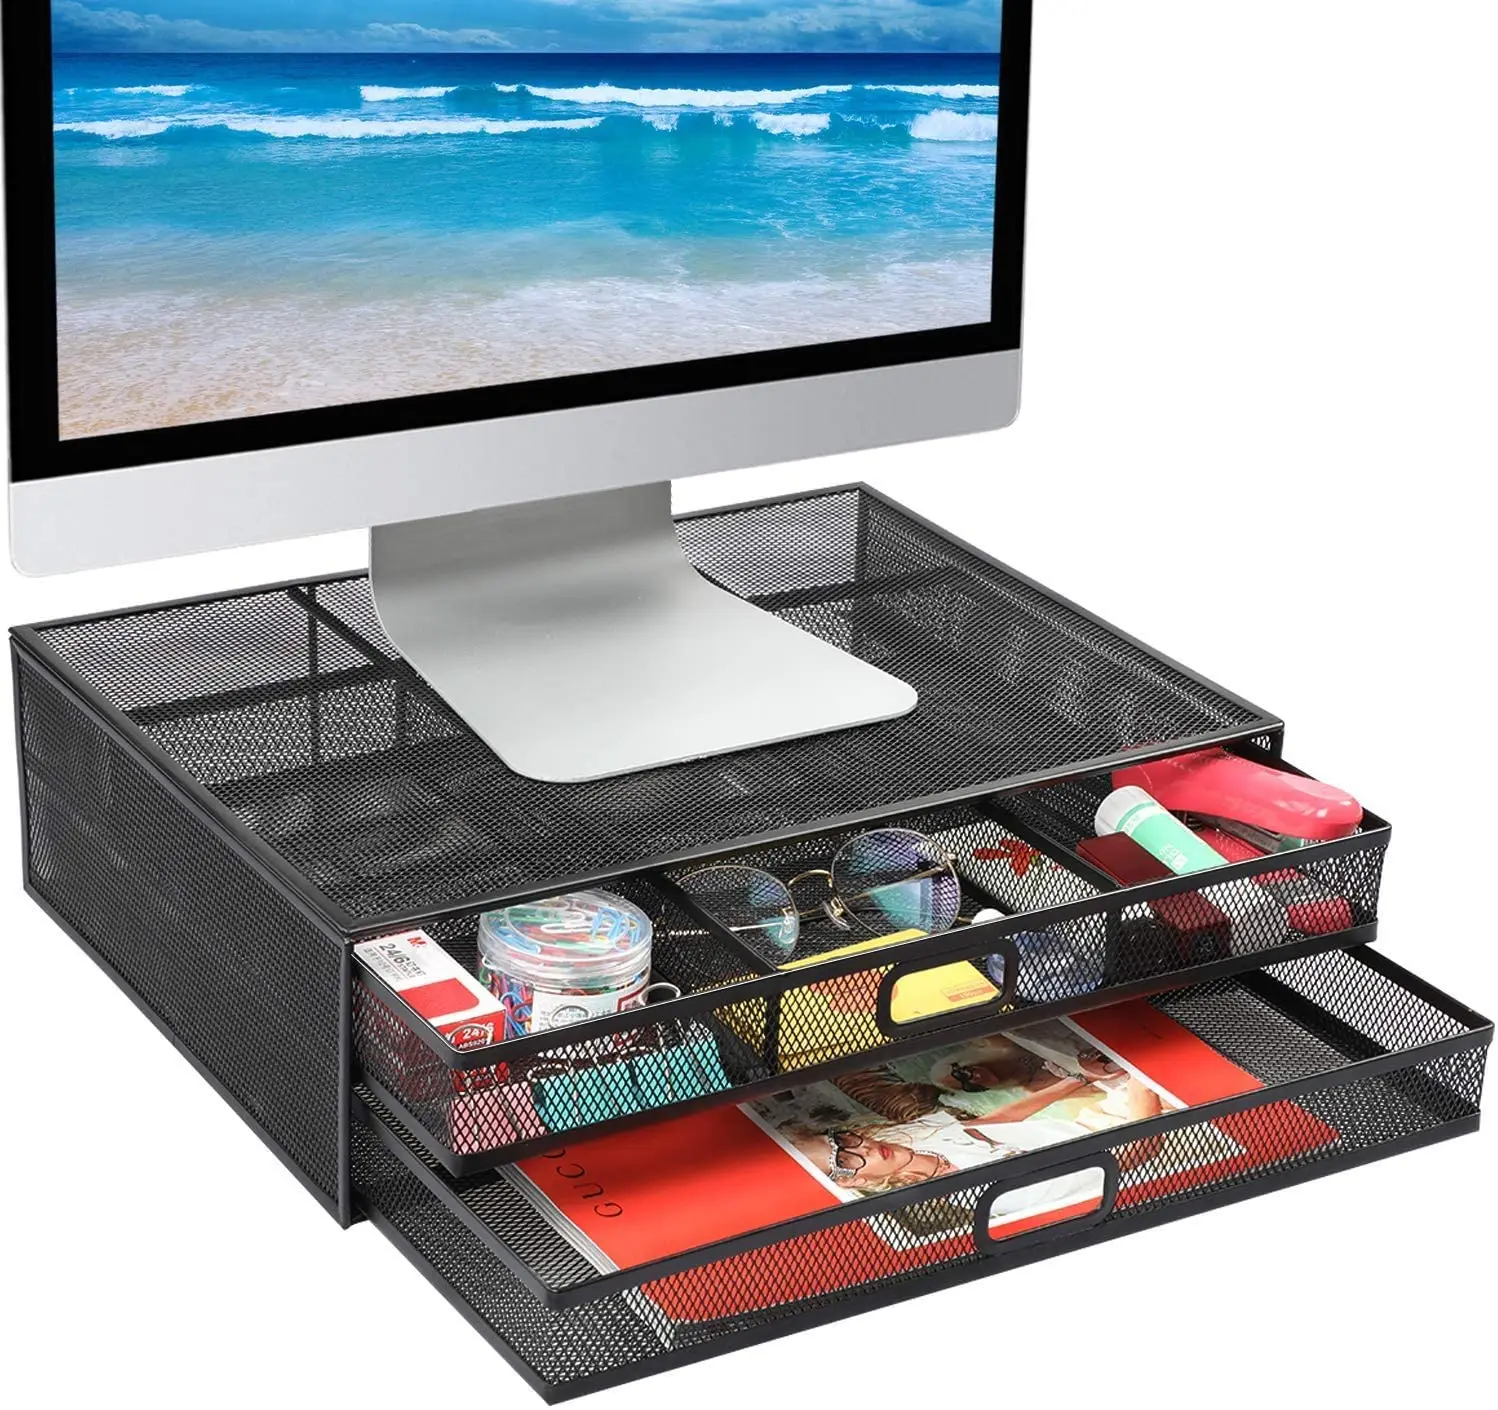 Monitor Stand Riser Drawer - Mesh Metal Desk Organizer with PC, Laptop, Notebook, printer Holder with Pull Out Storage Drawer